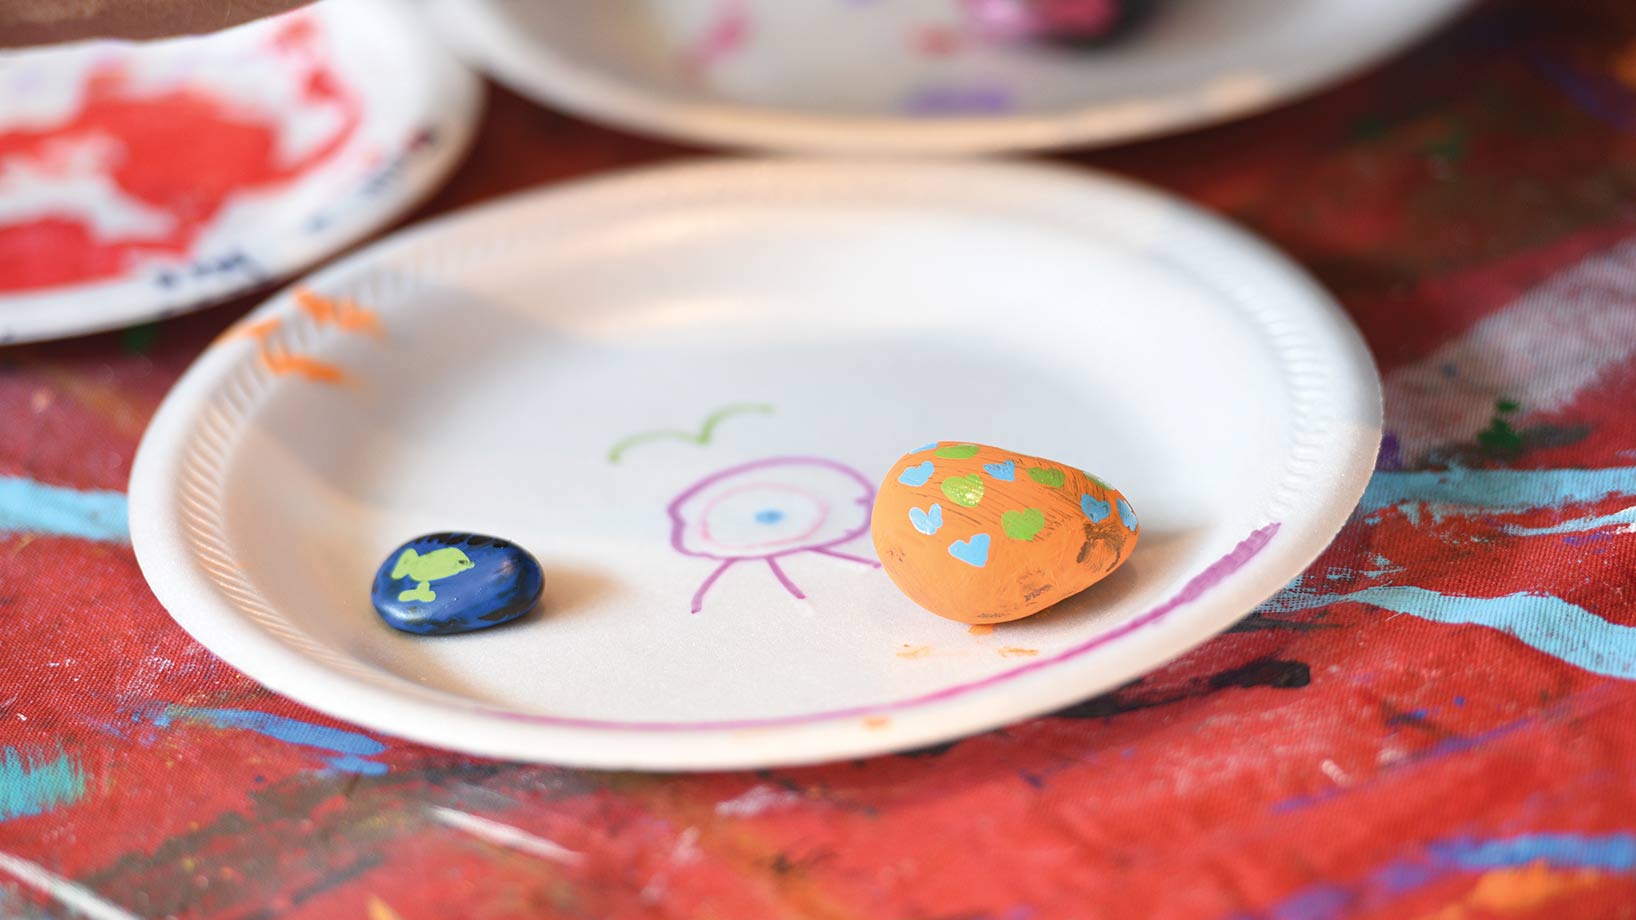 Two painted rocks on a plate with doodled drawings. Other plates seen in background, all on paint-covered tablecloth